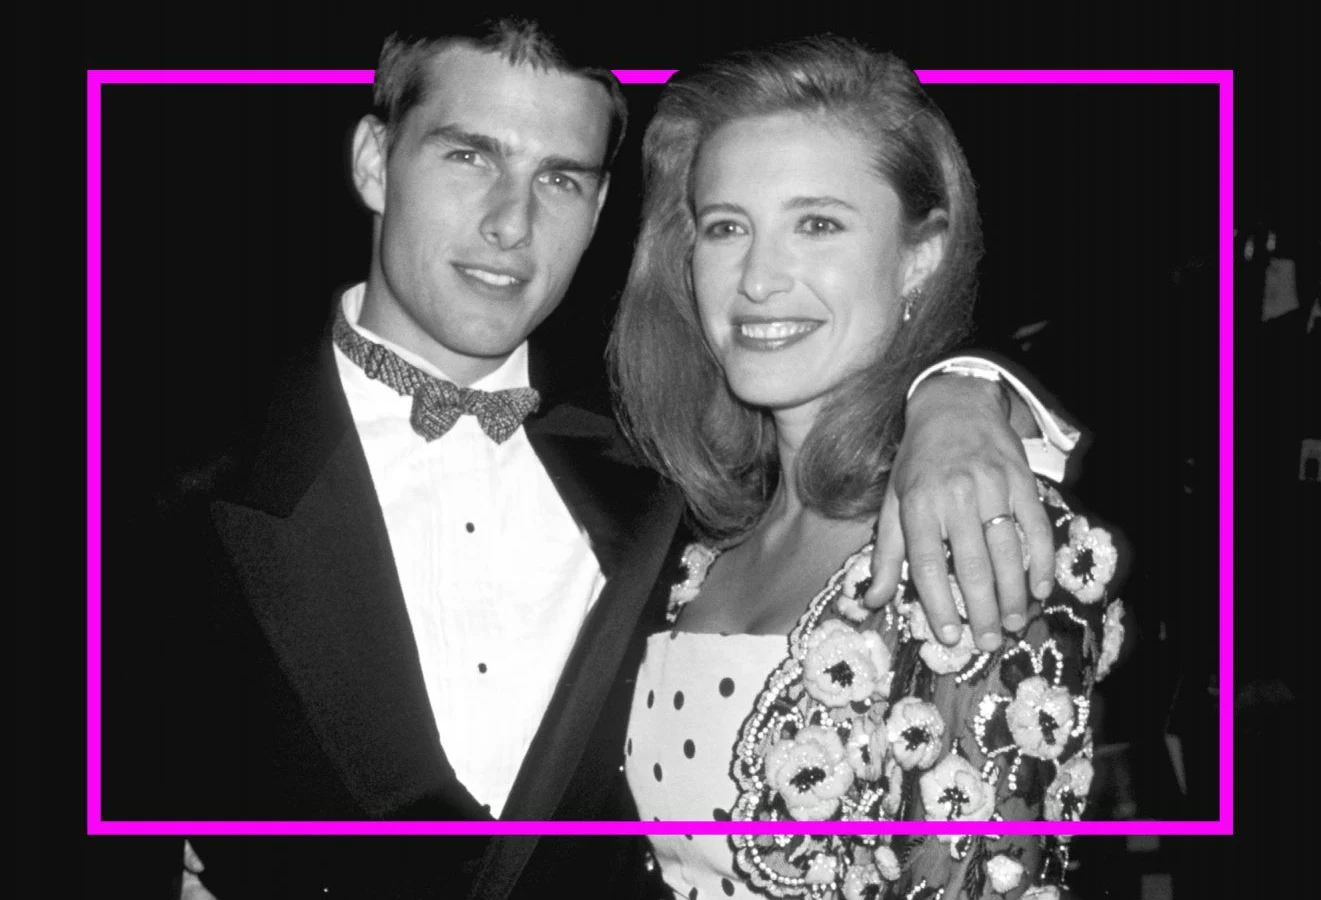 Tom Cruise Wife Mimi Rogers, Age, Height, Bio, Kids, Instagram, Net Worth, and Love Story.